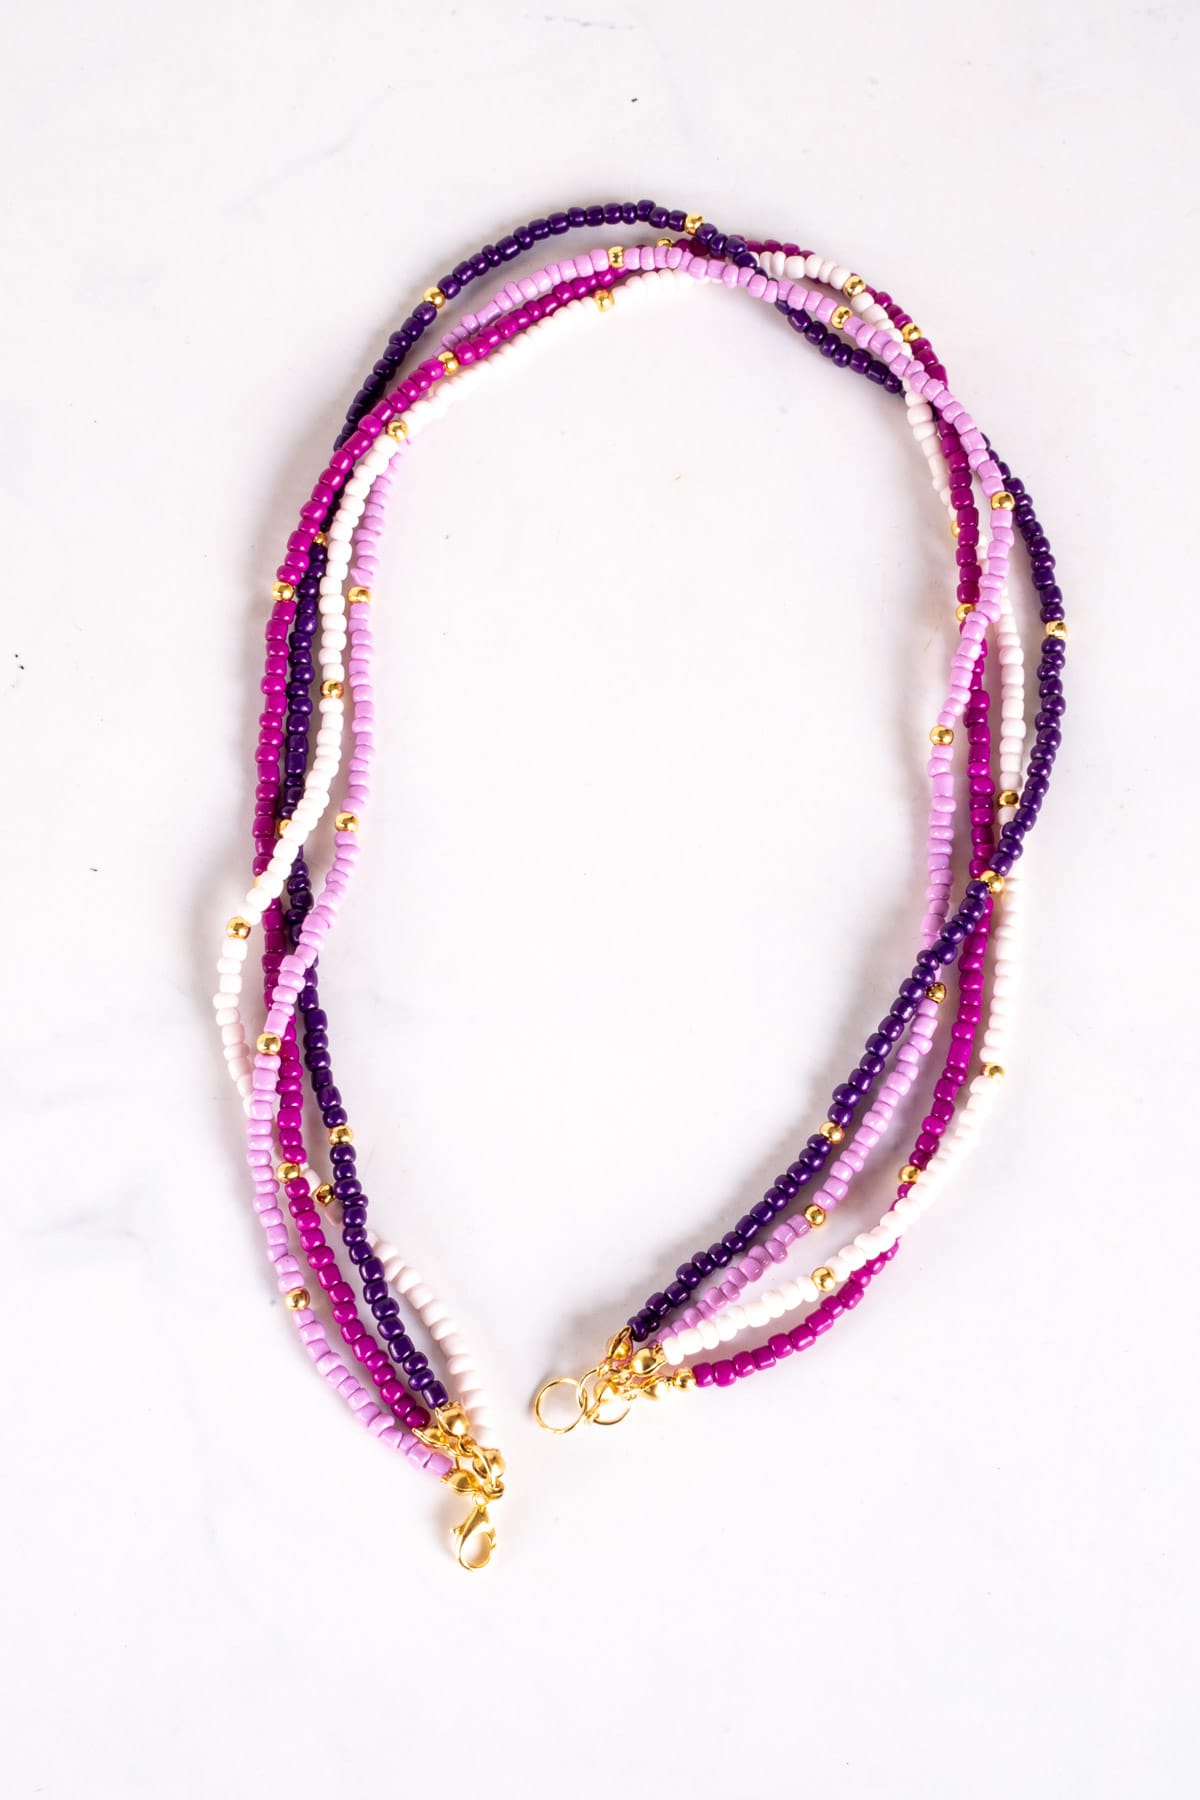 Seed bead necklace in purple and gold.